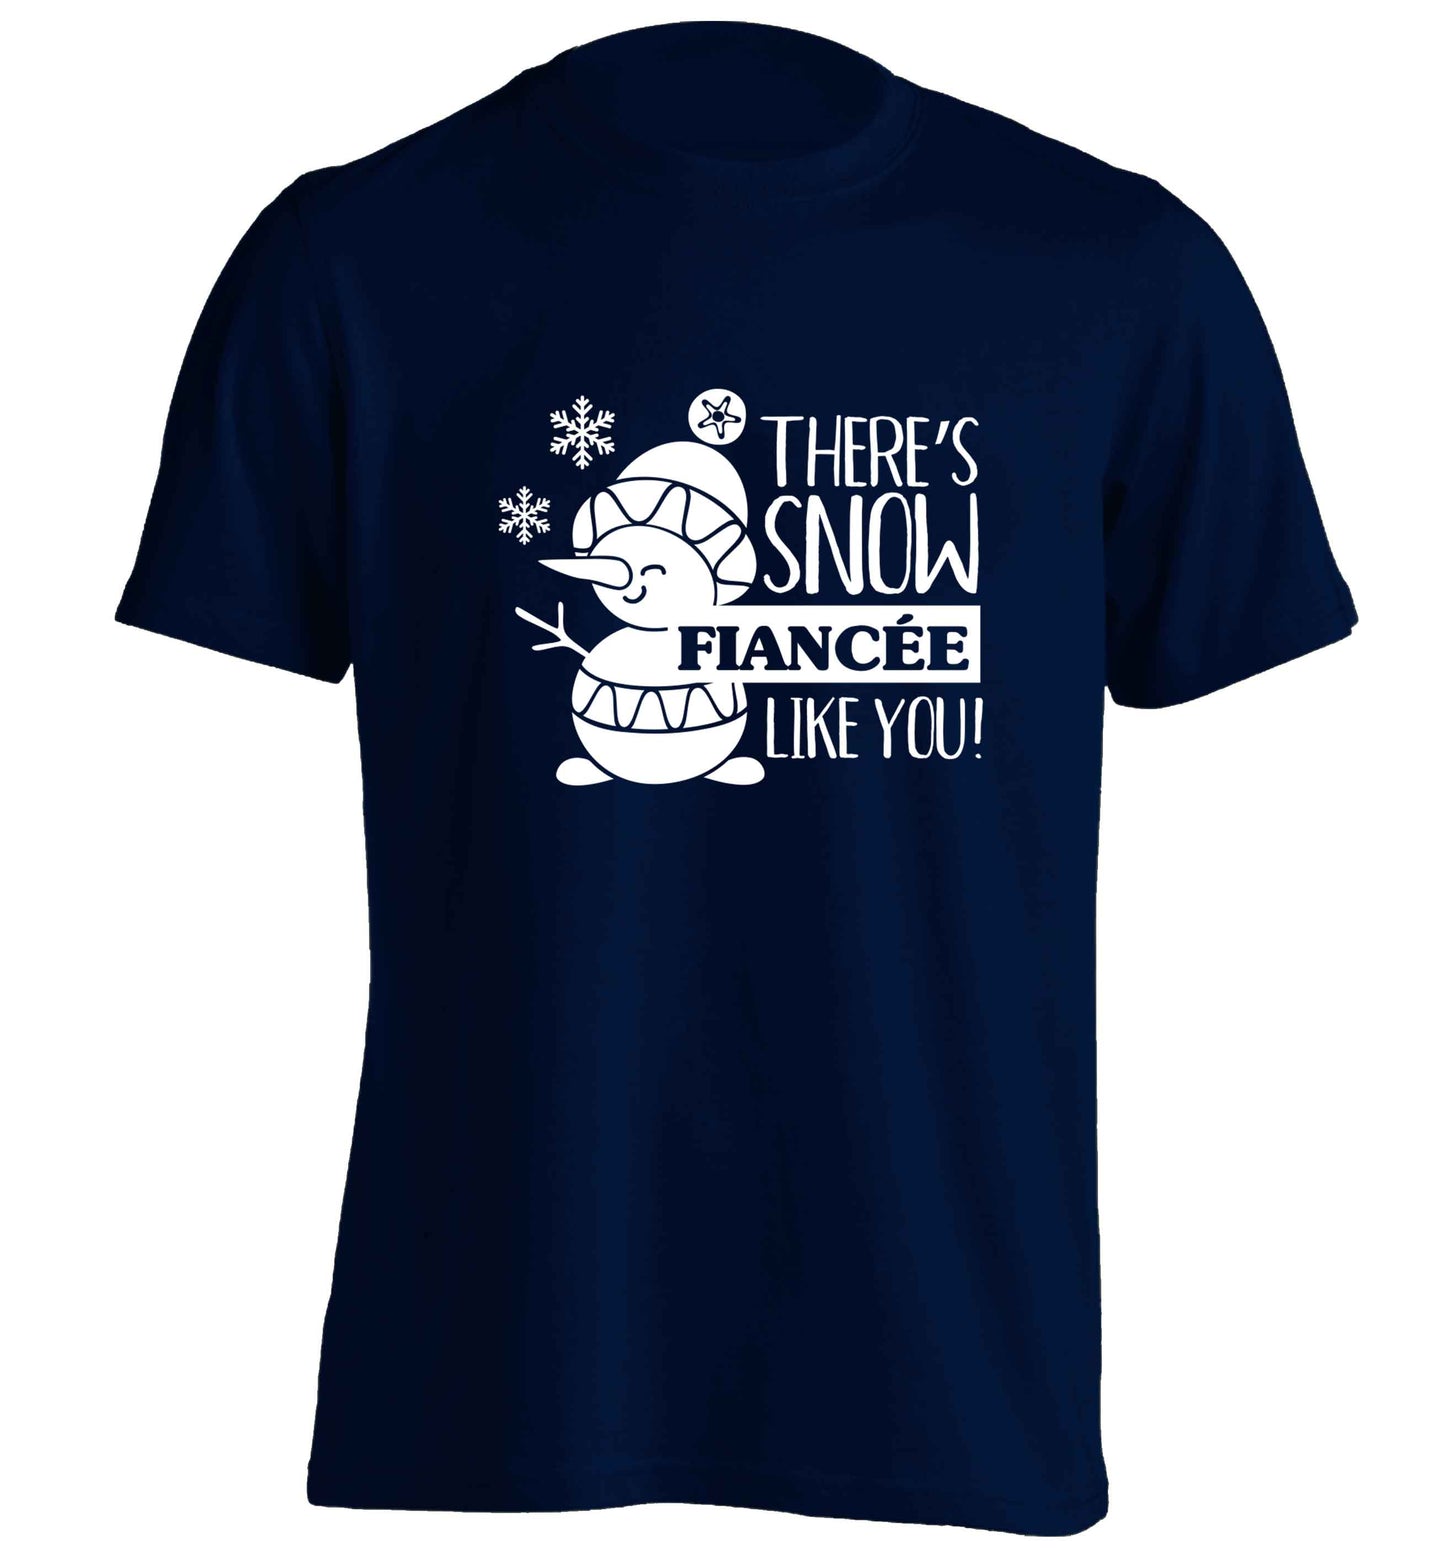 There's snow fiancee like you adults unisex navy Tshirt 2XL